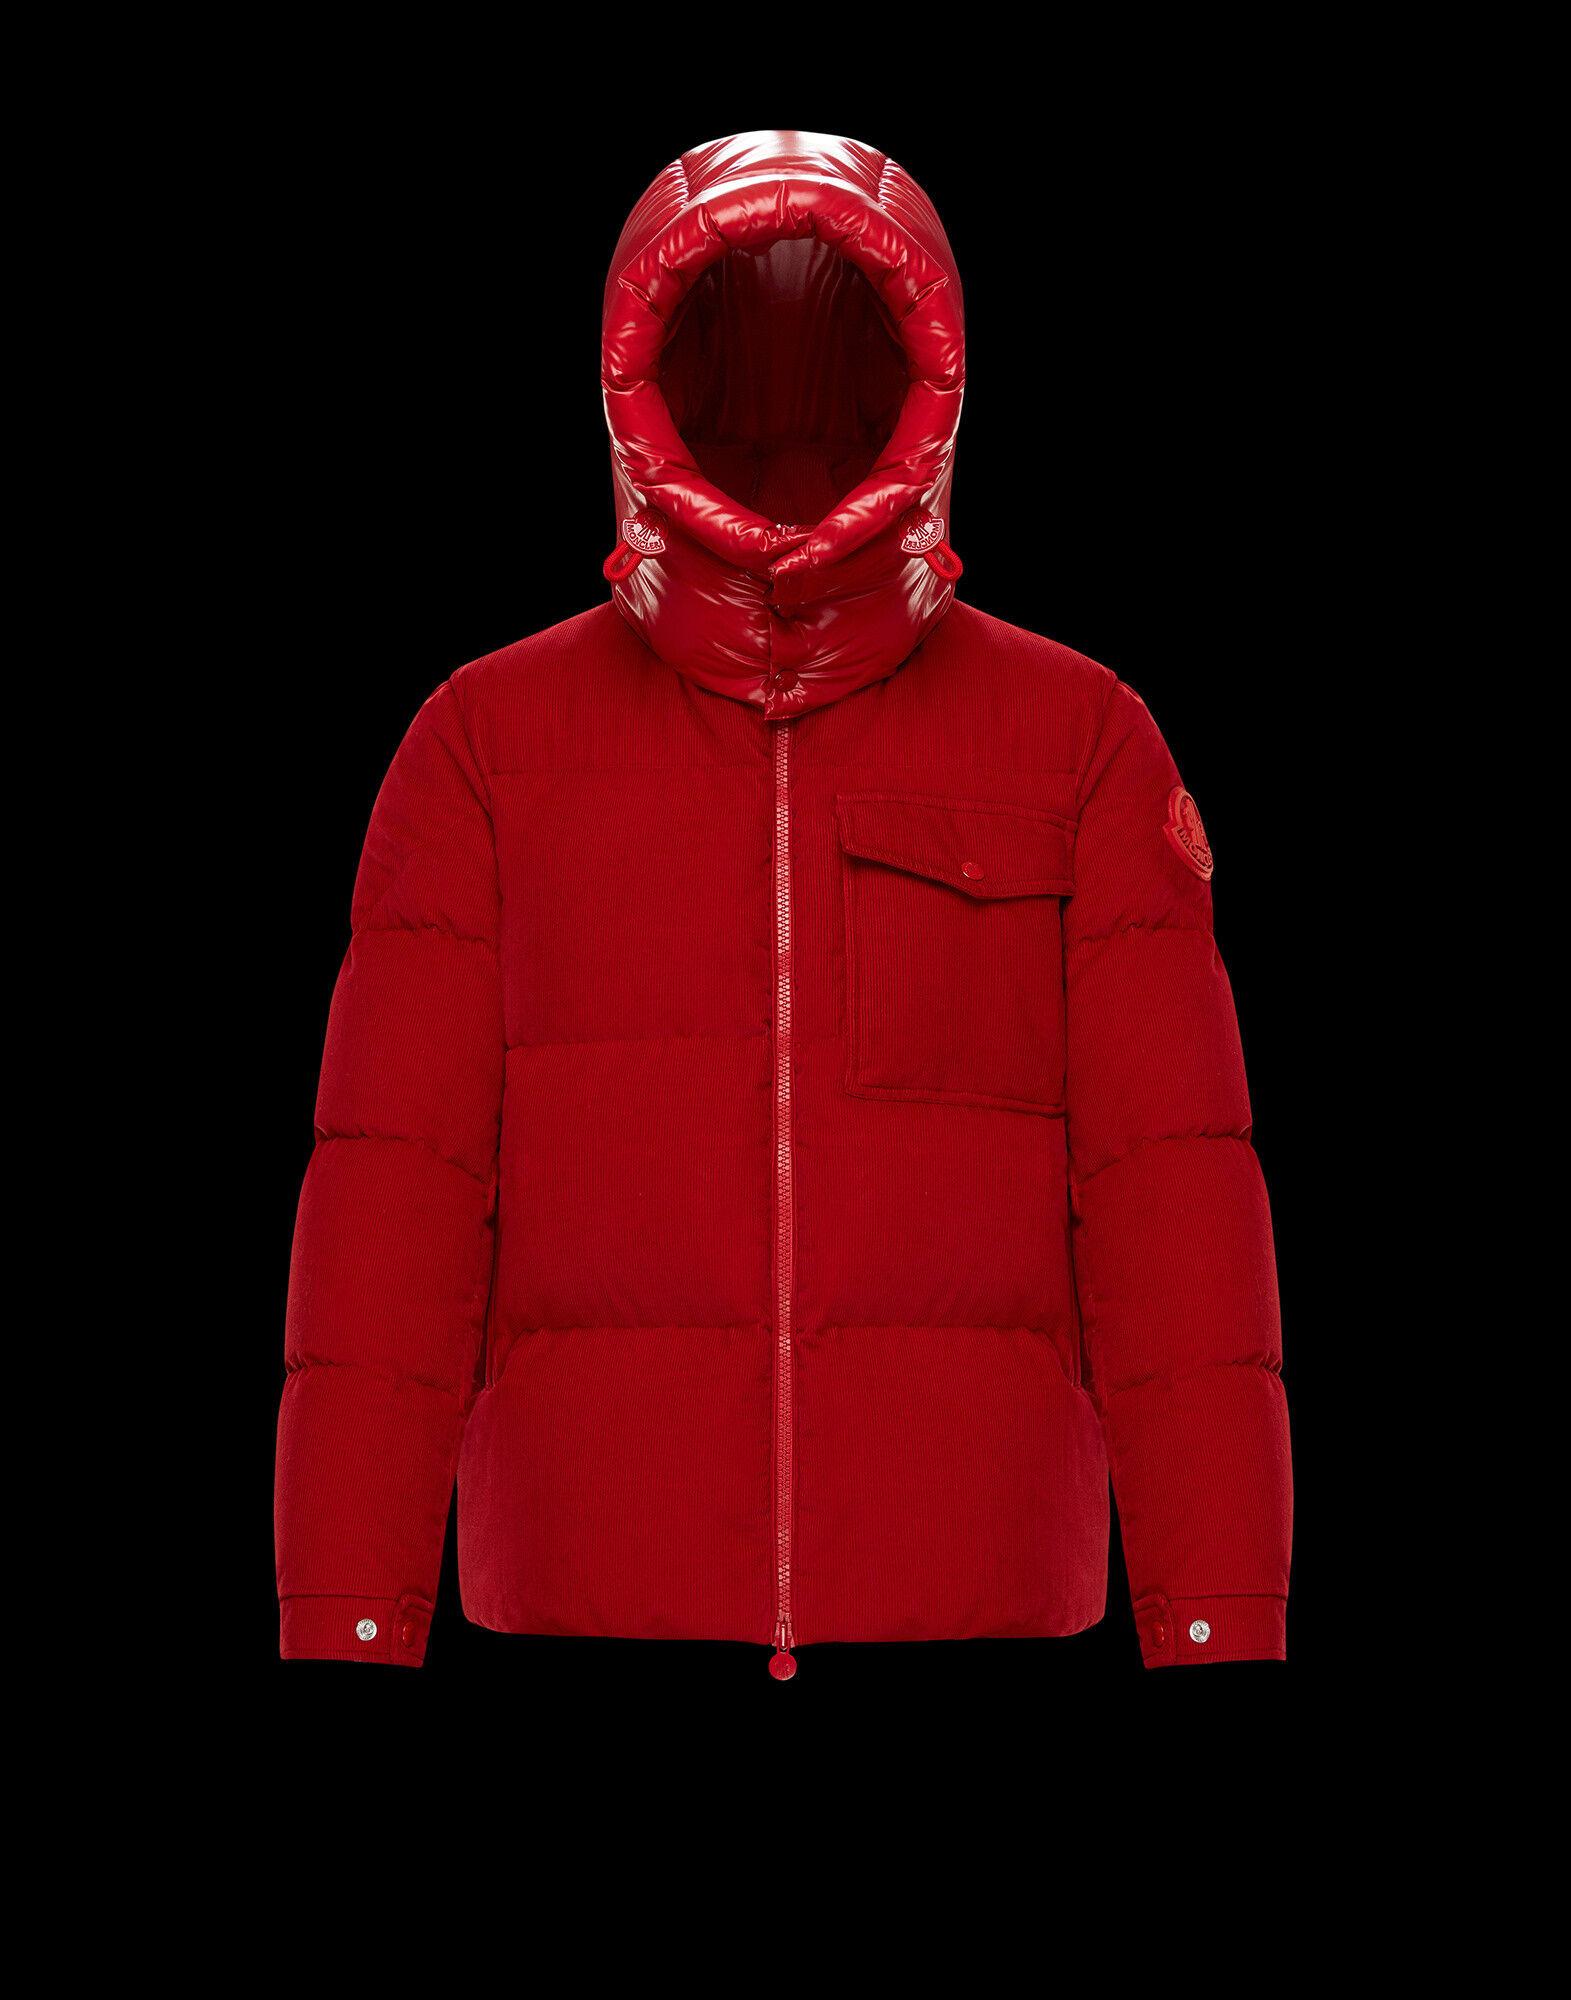 Moncler Synthetic Vignemale in Red for Men - Lyst